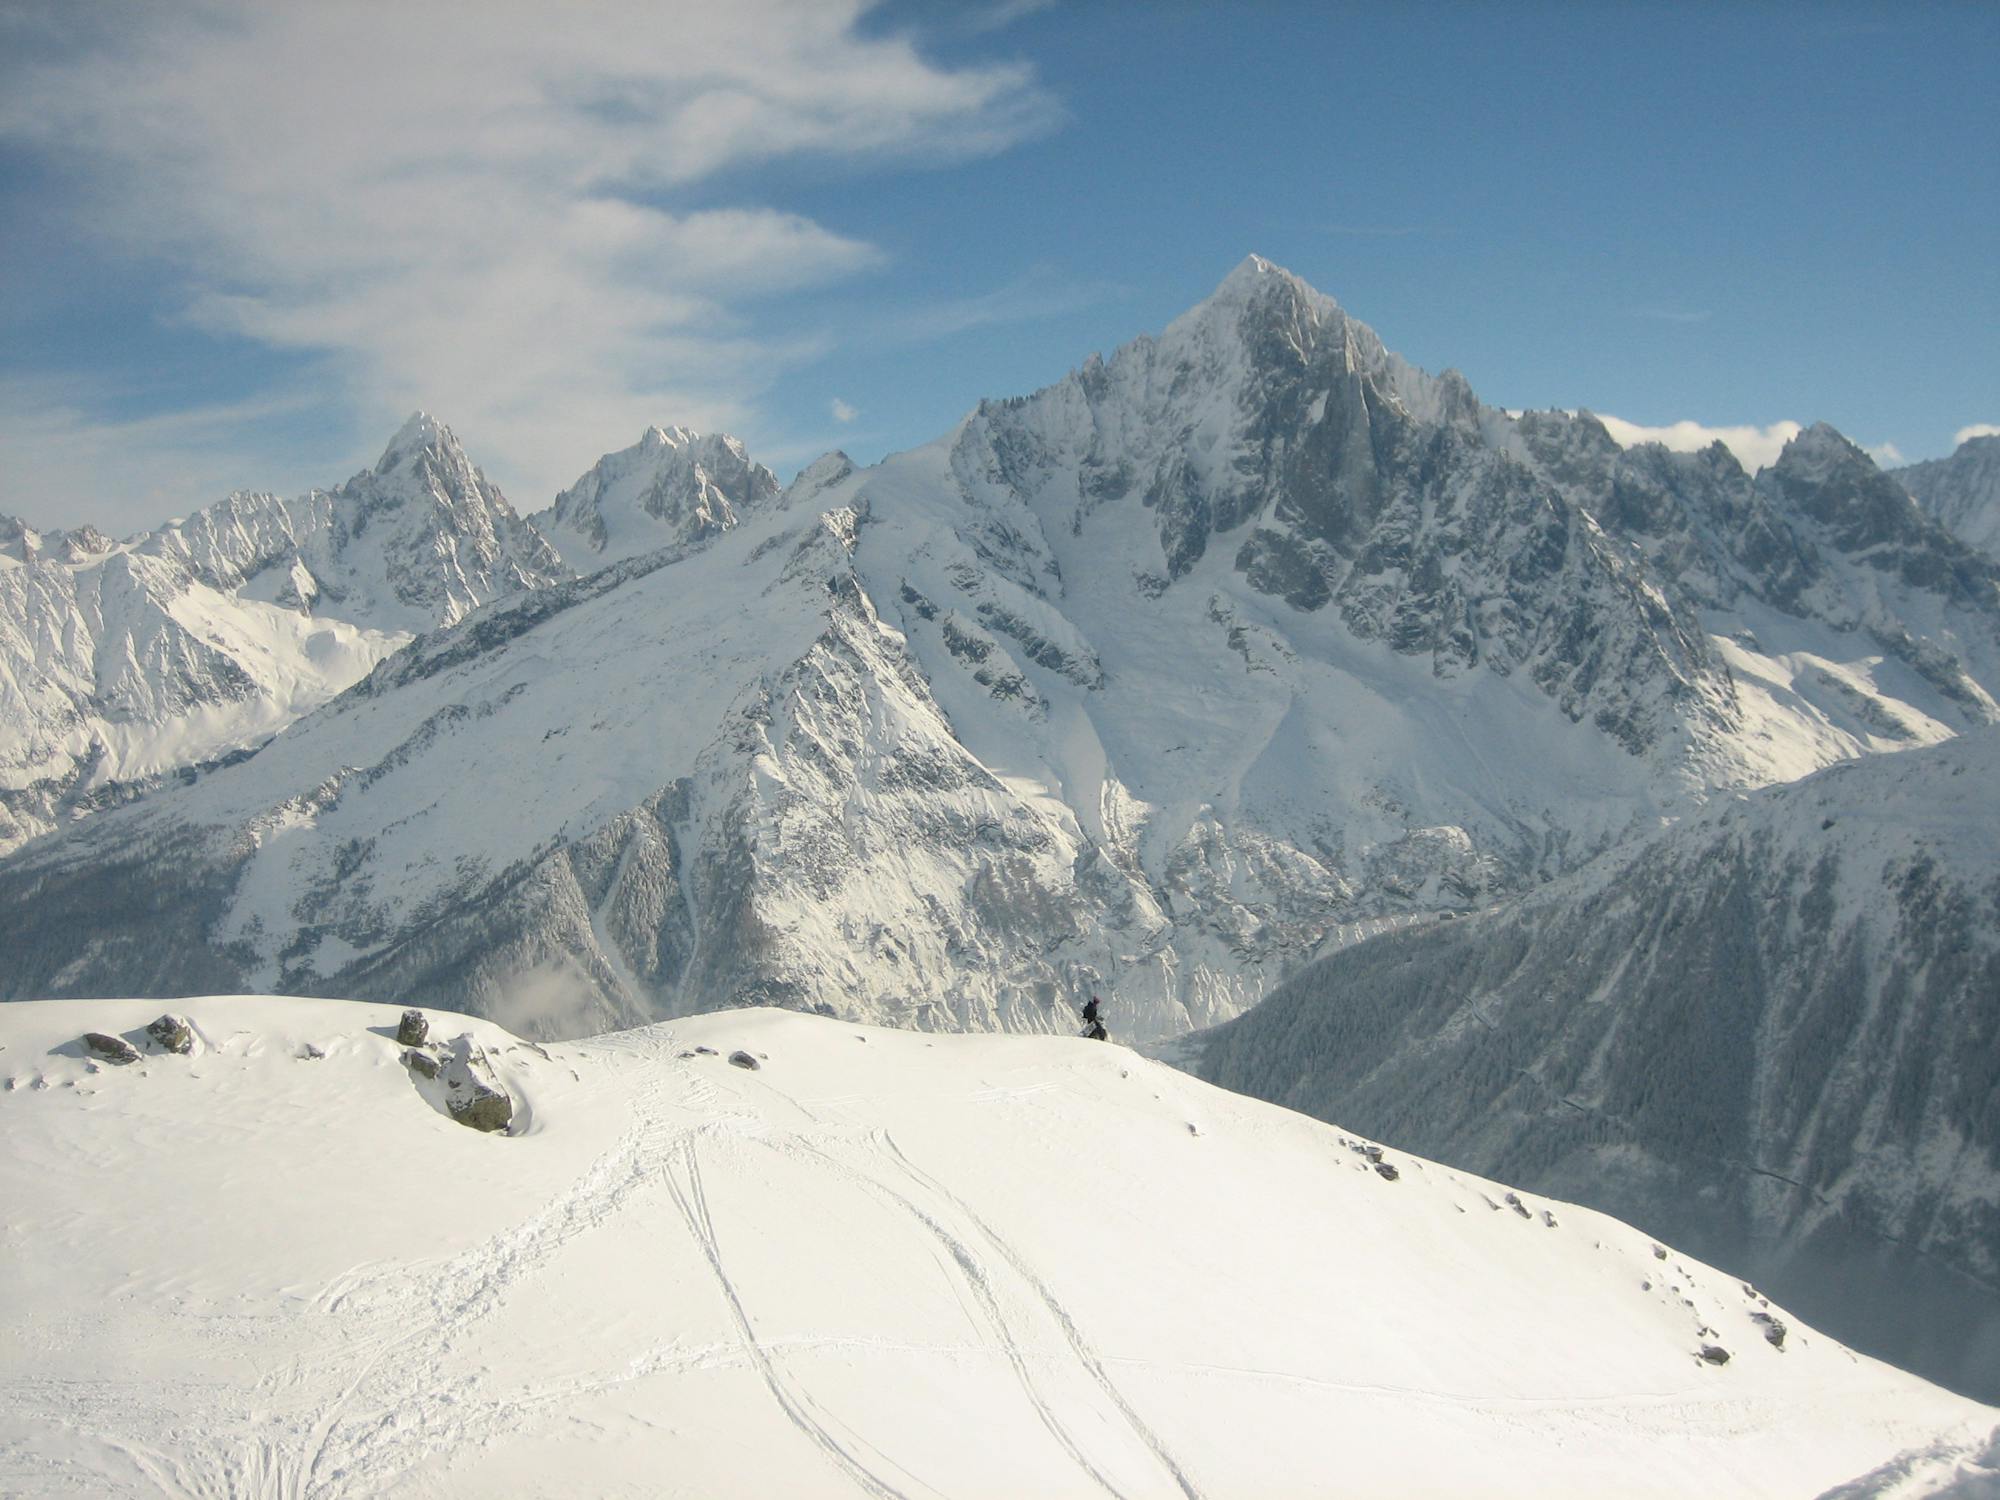 The ridge just above the Hotel Face, Grands Montets in the background